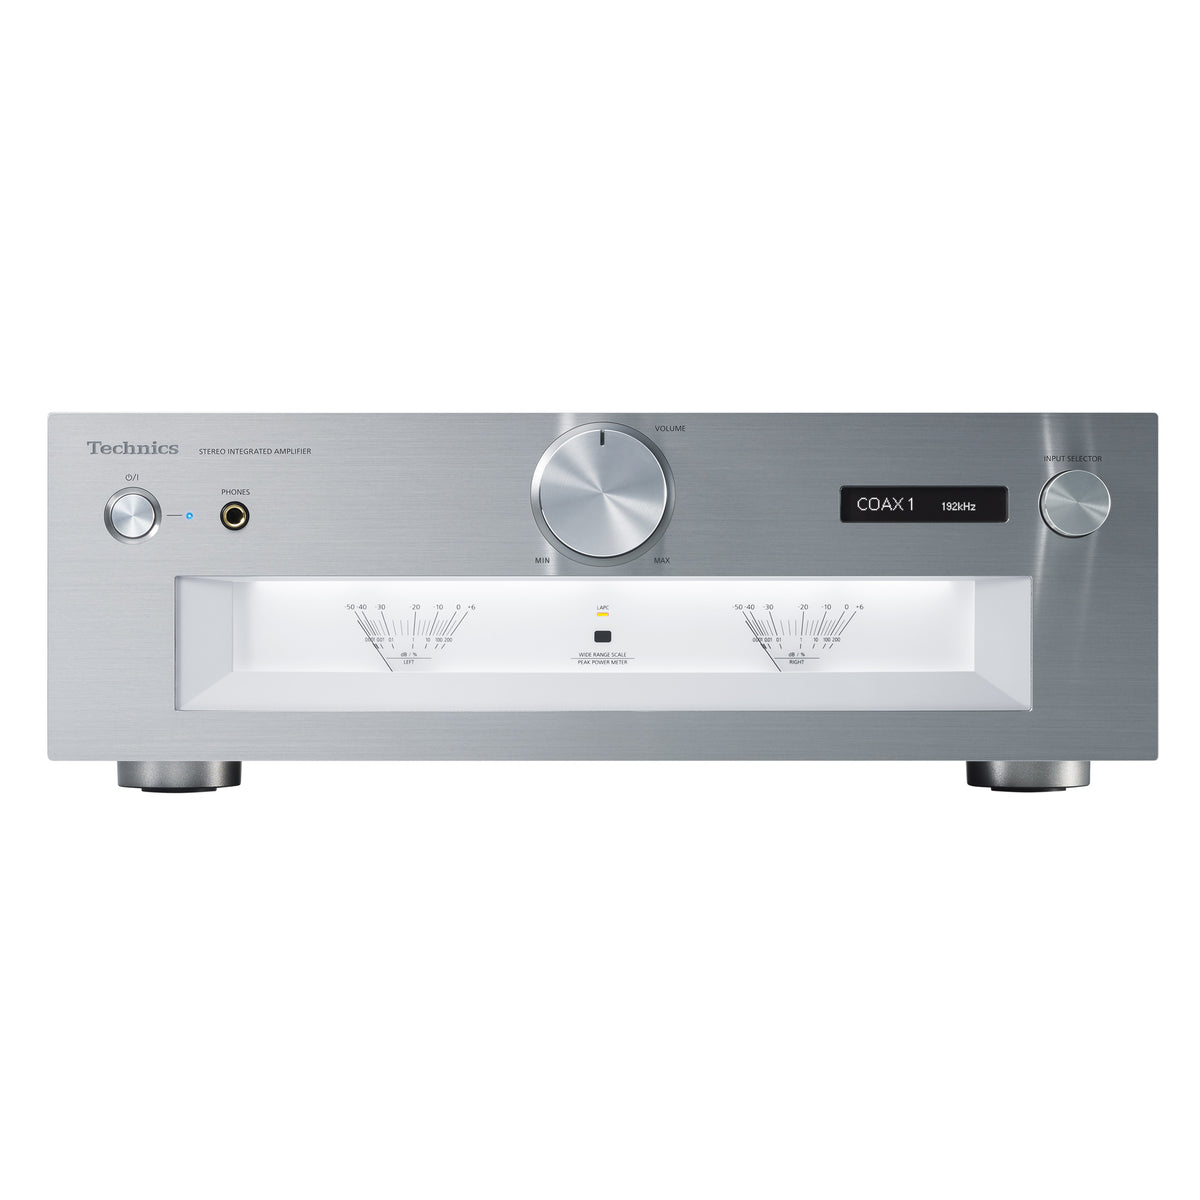 Stereo Integrated Amplifier SU-G700M2